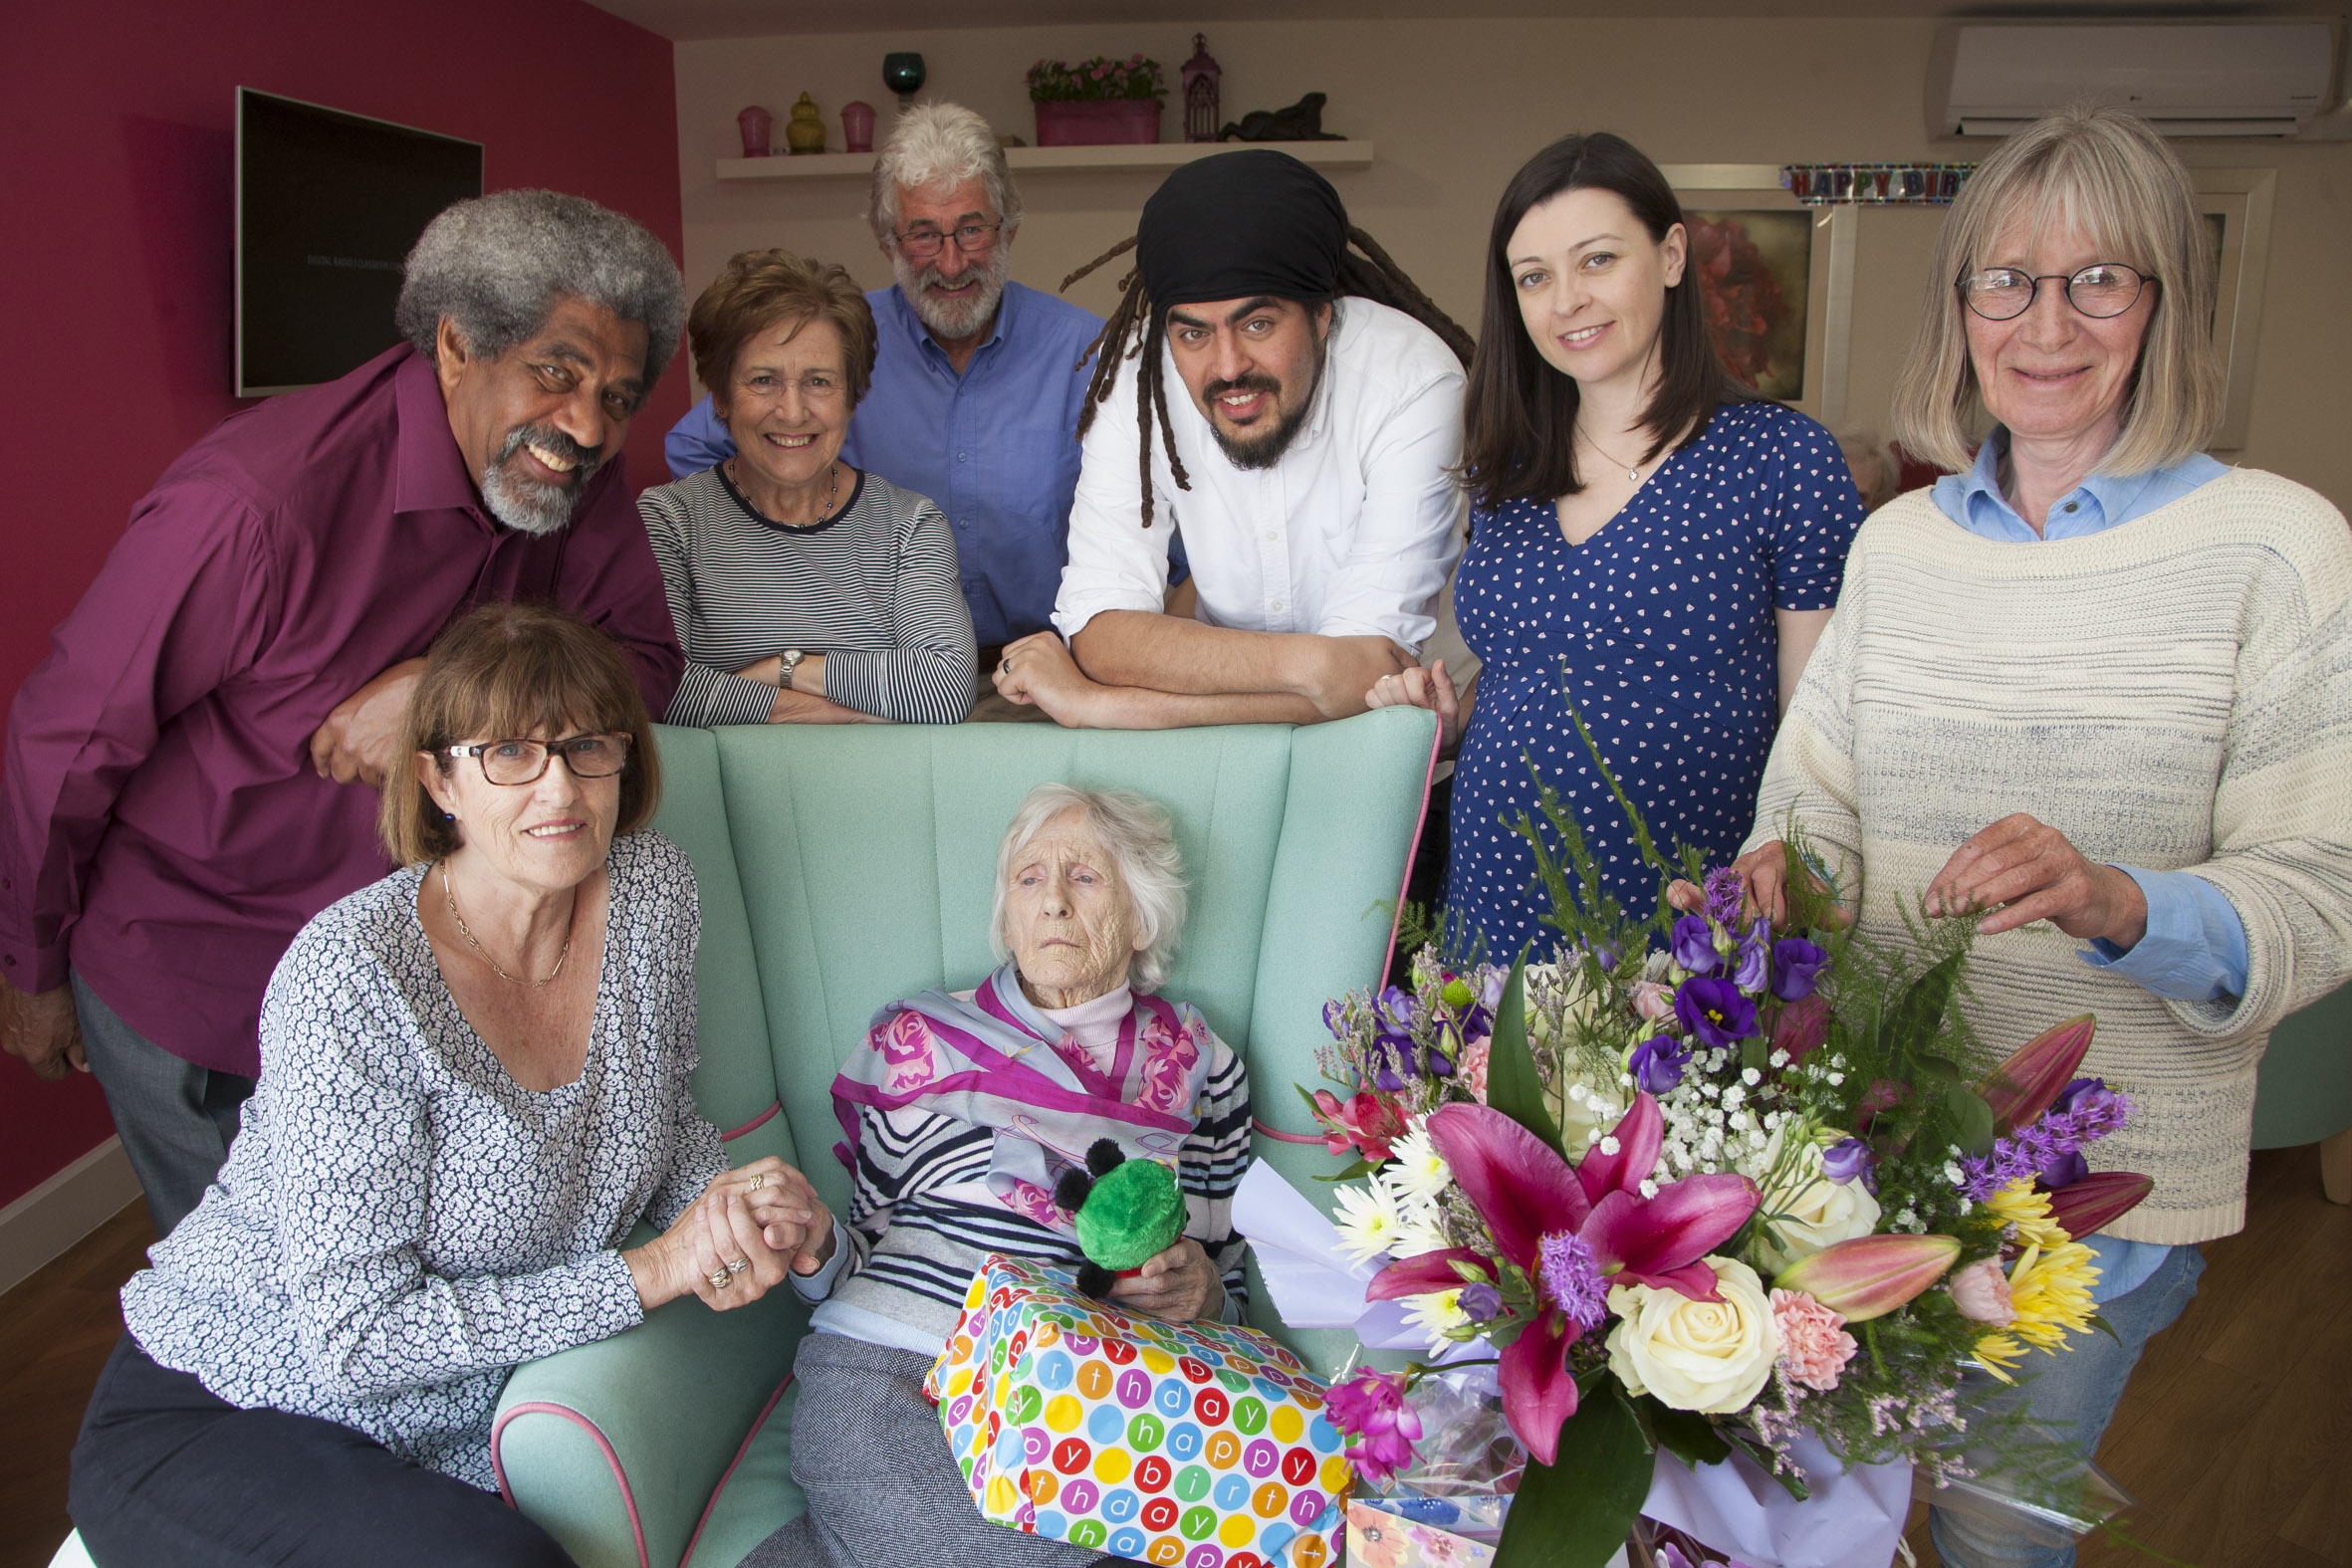 Grace celebrates her 101st birthday in style after spending 60 years as dedicated nurse